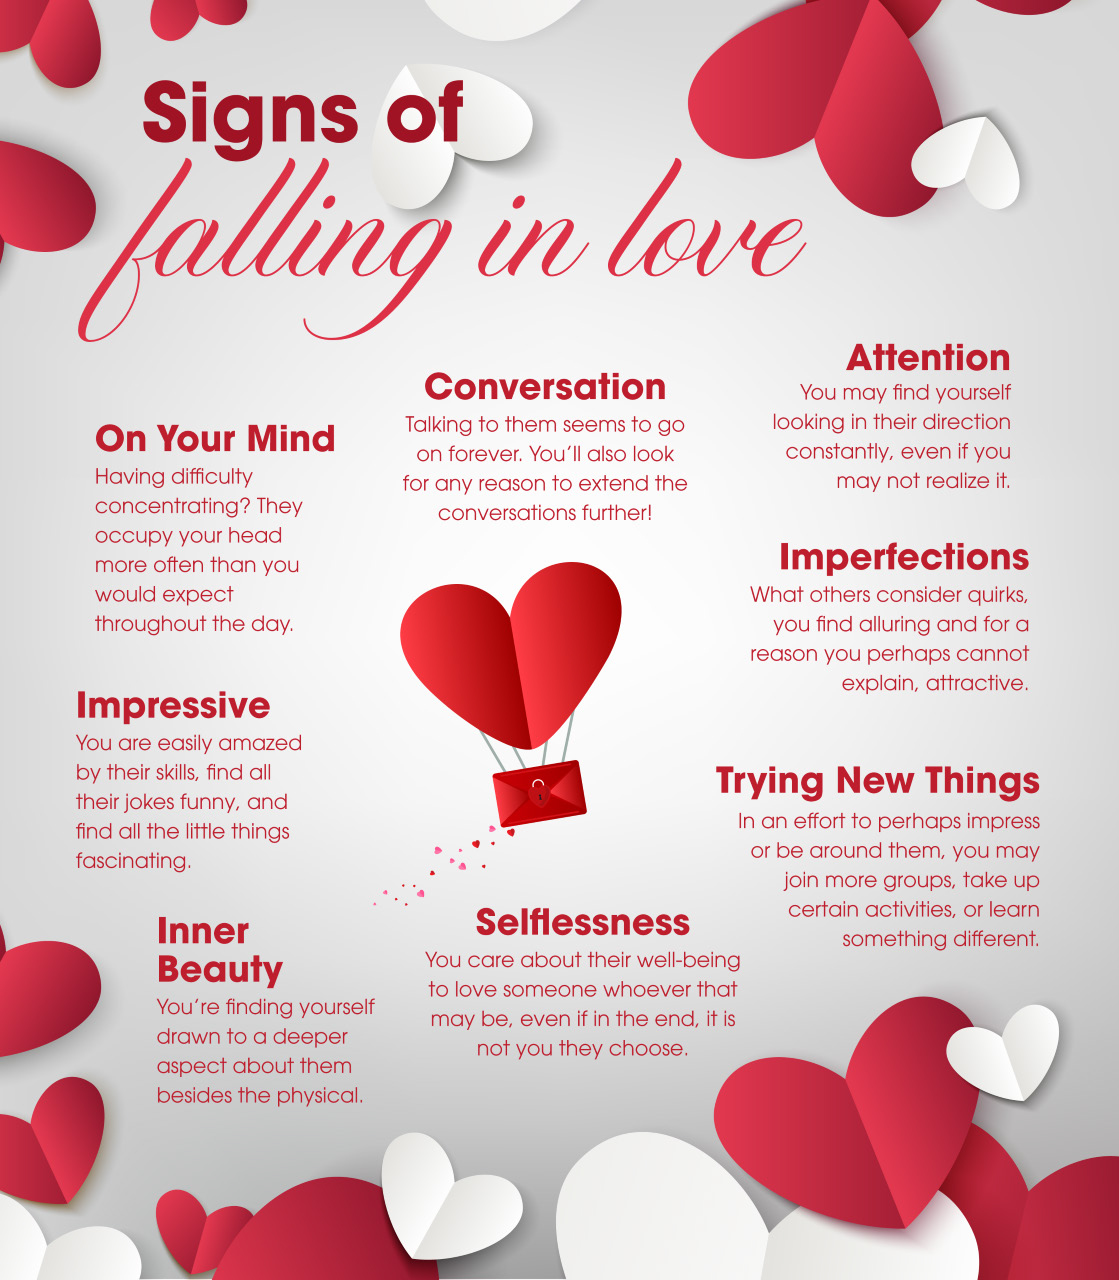 Signs of falling in love infographic